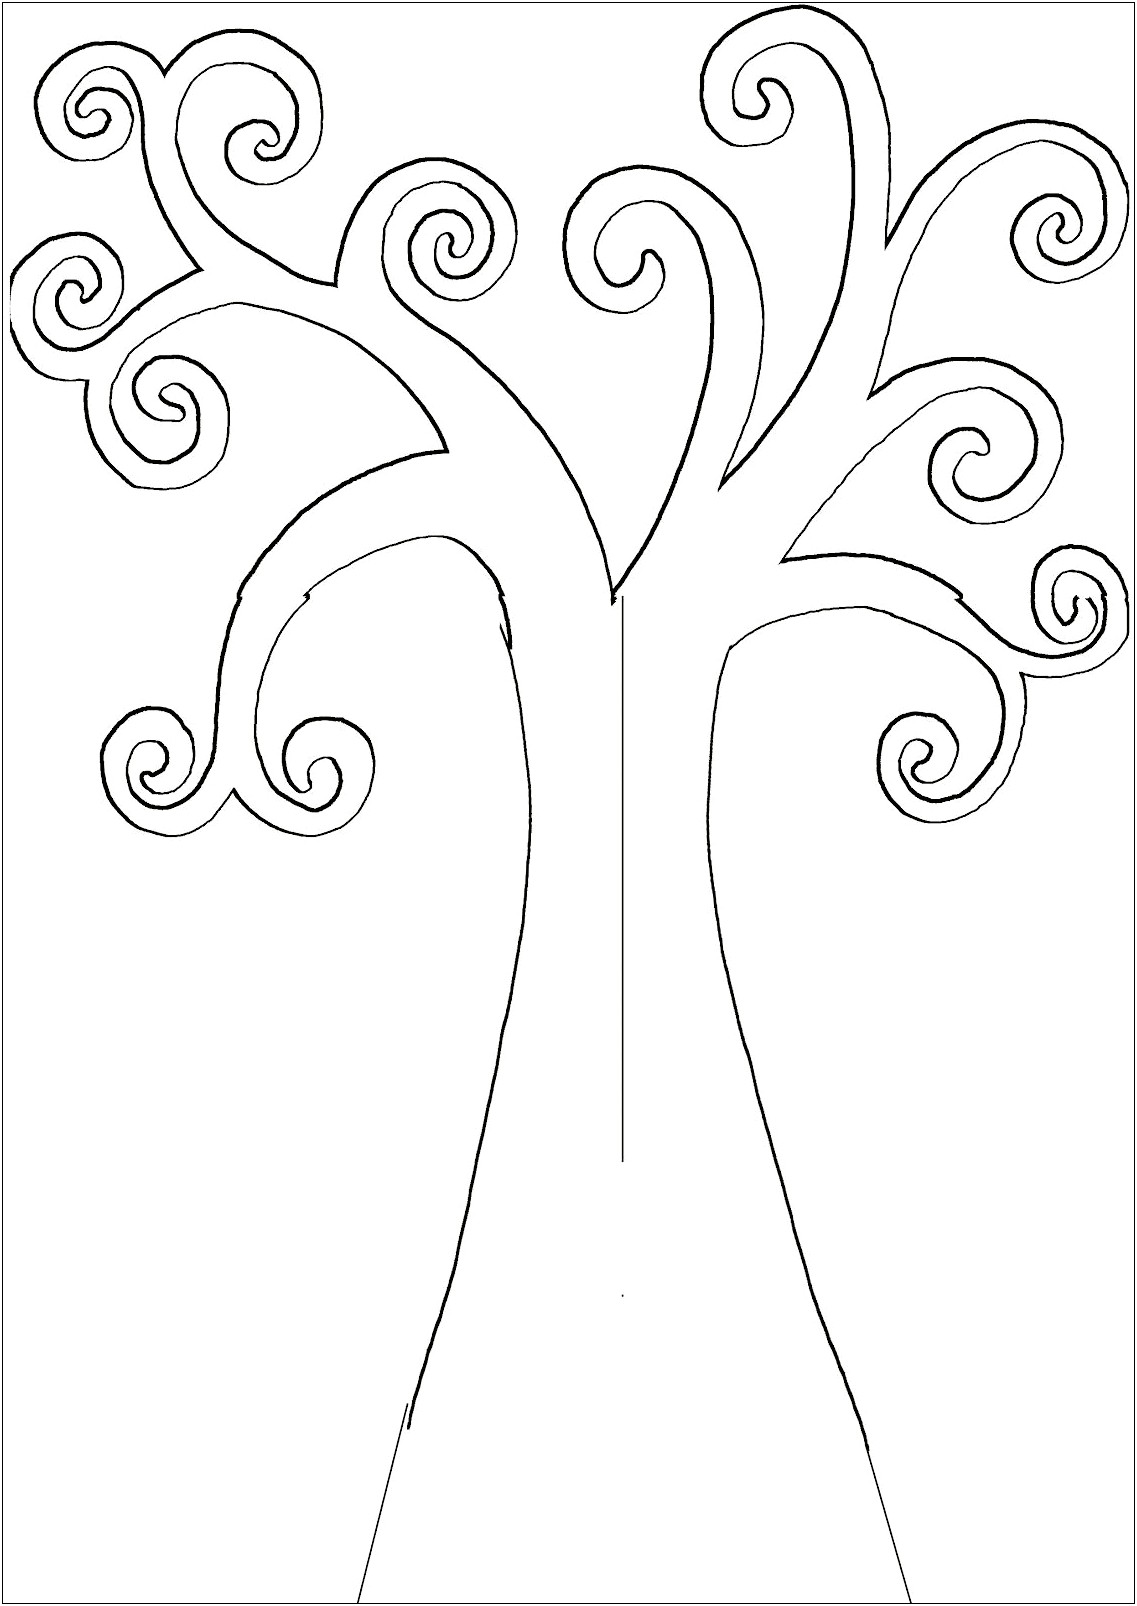 Free Fingerprint Tree Template To Download